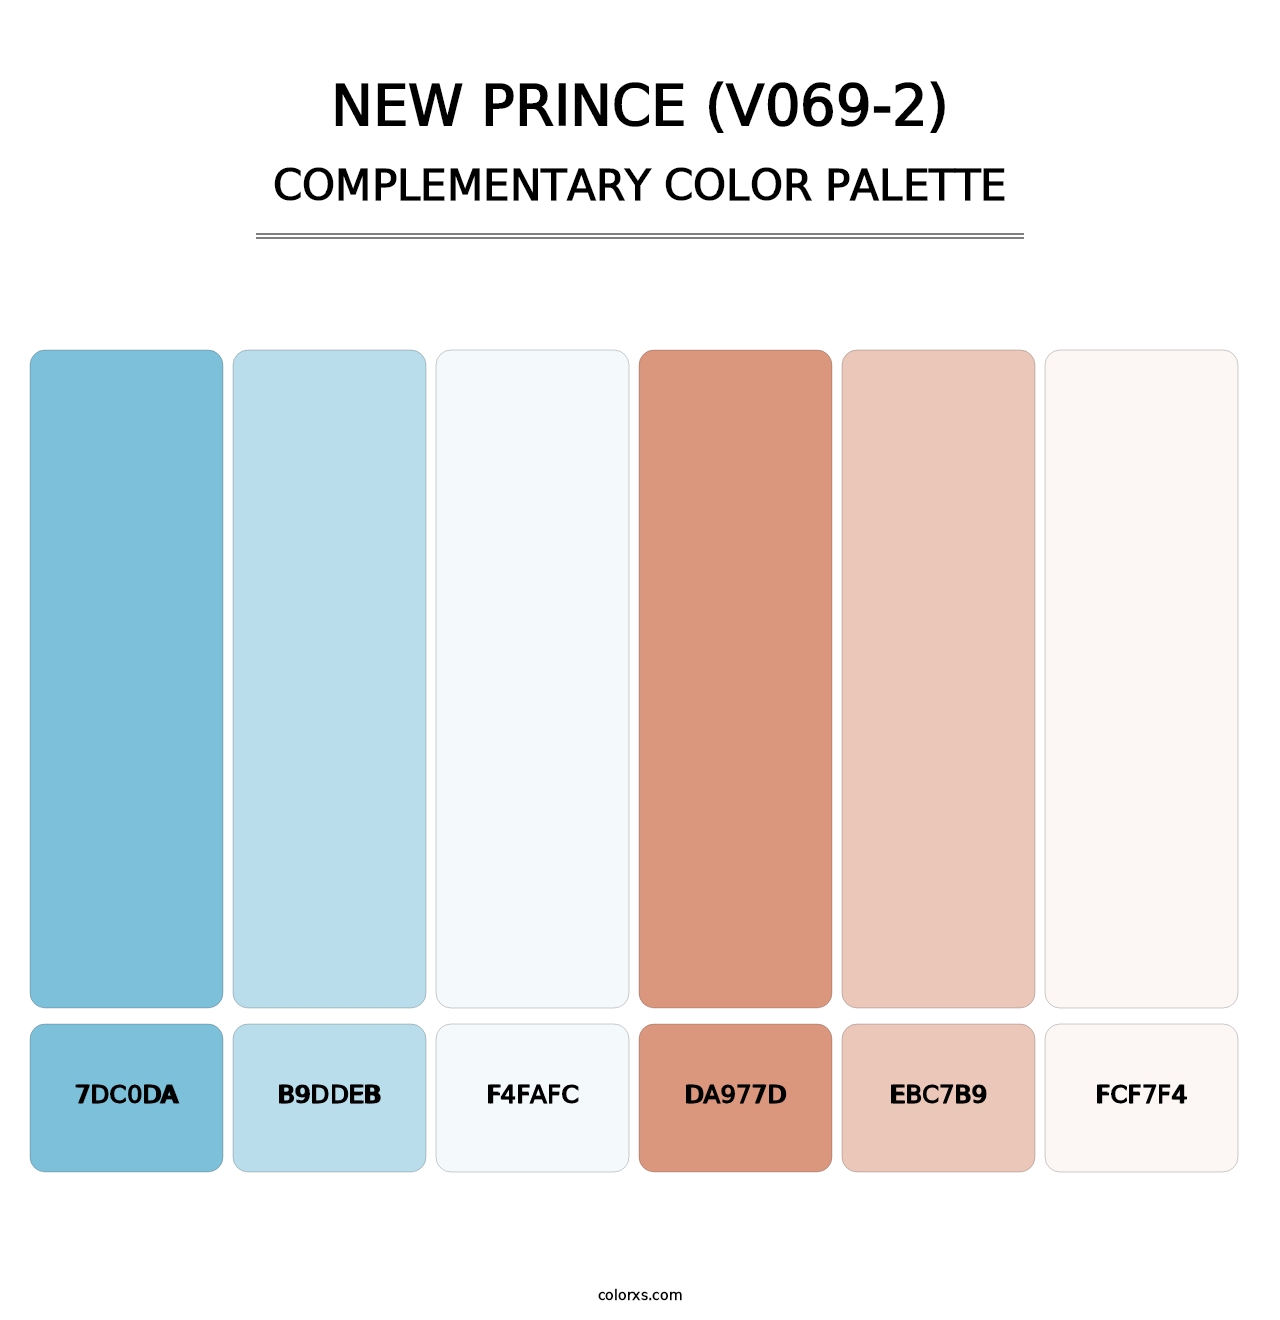 New Prince (V069-2) - Complementary Color Palette